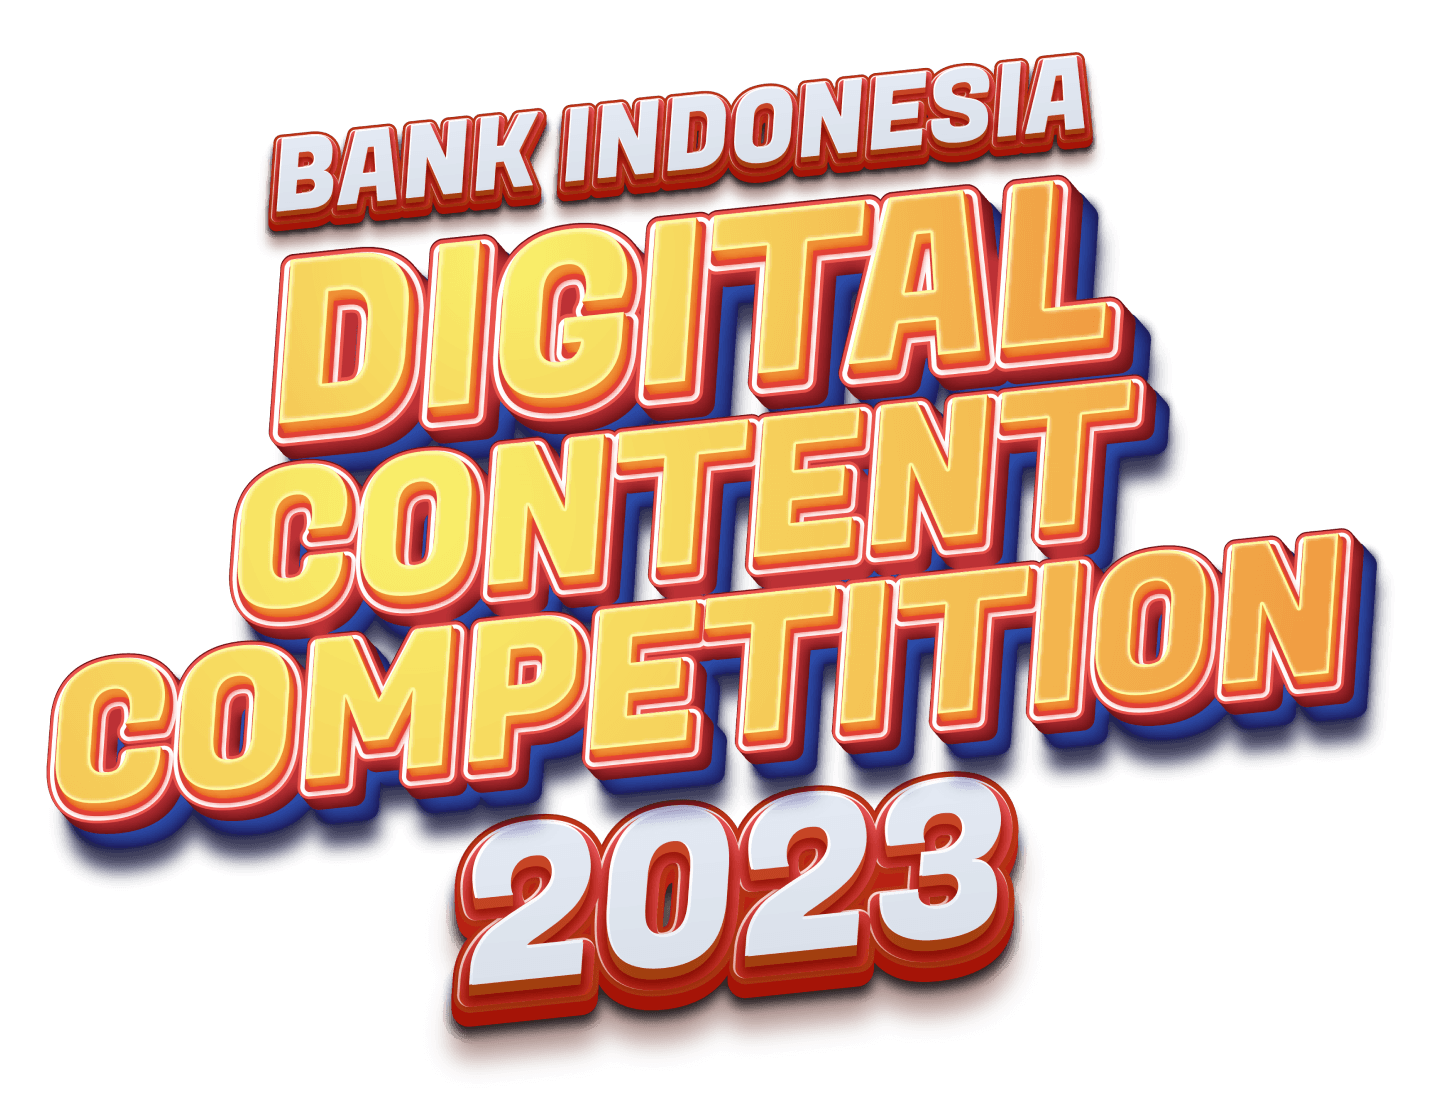 Bank Indonesia Digital Content Competition